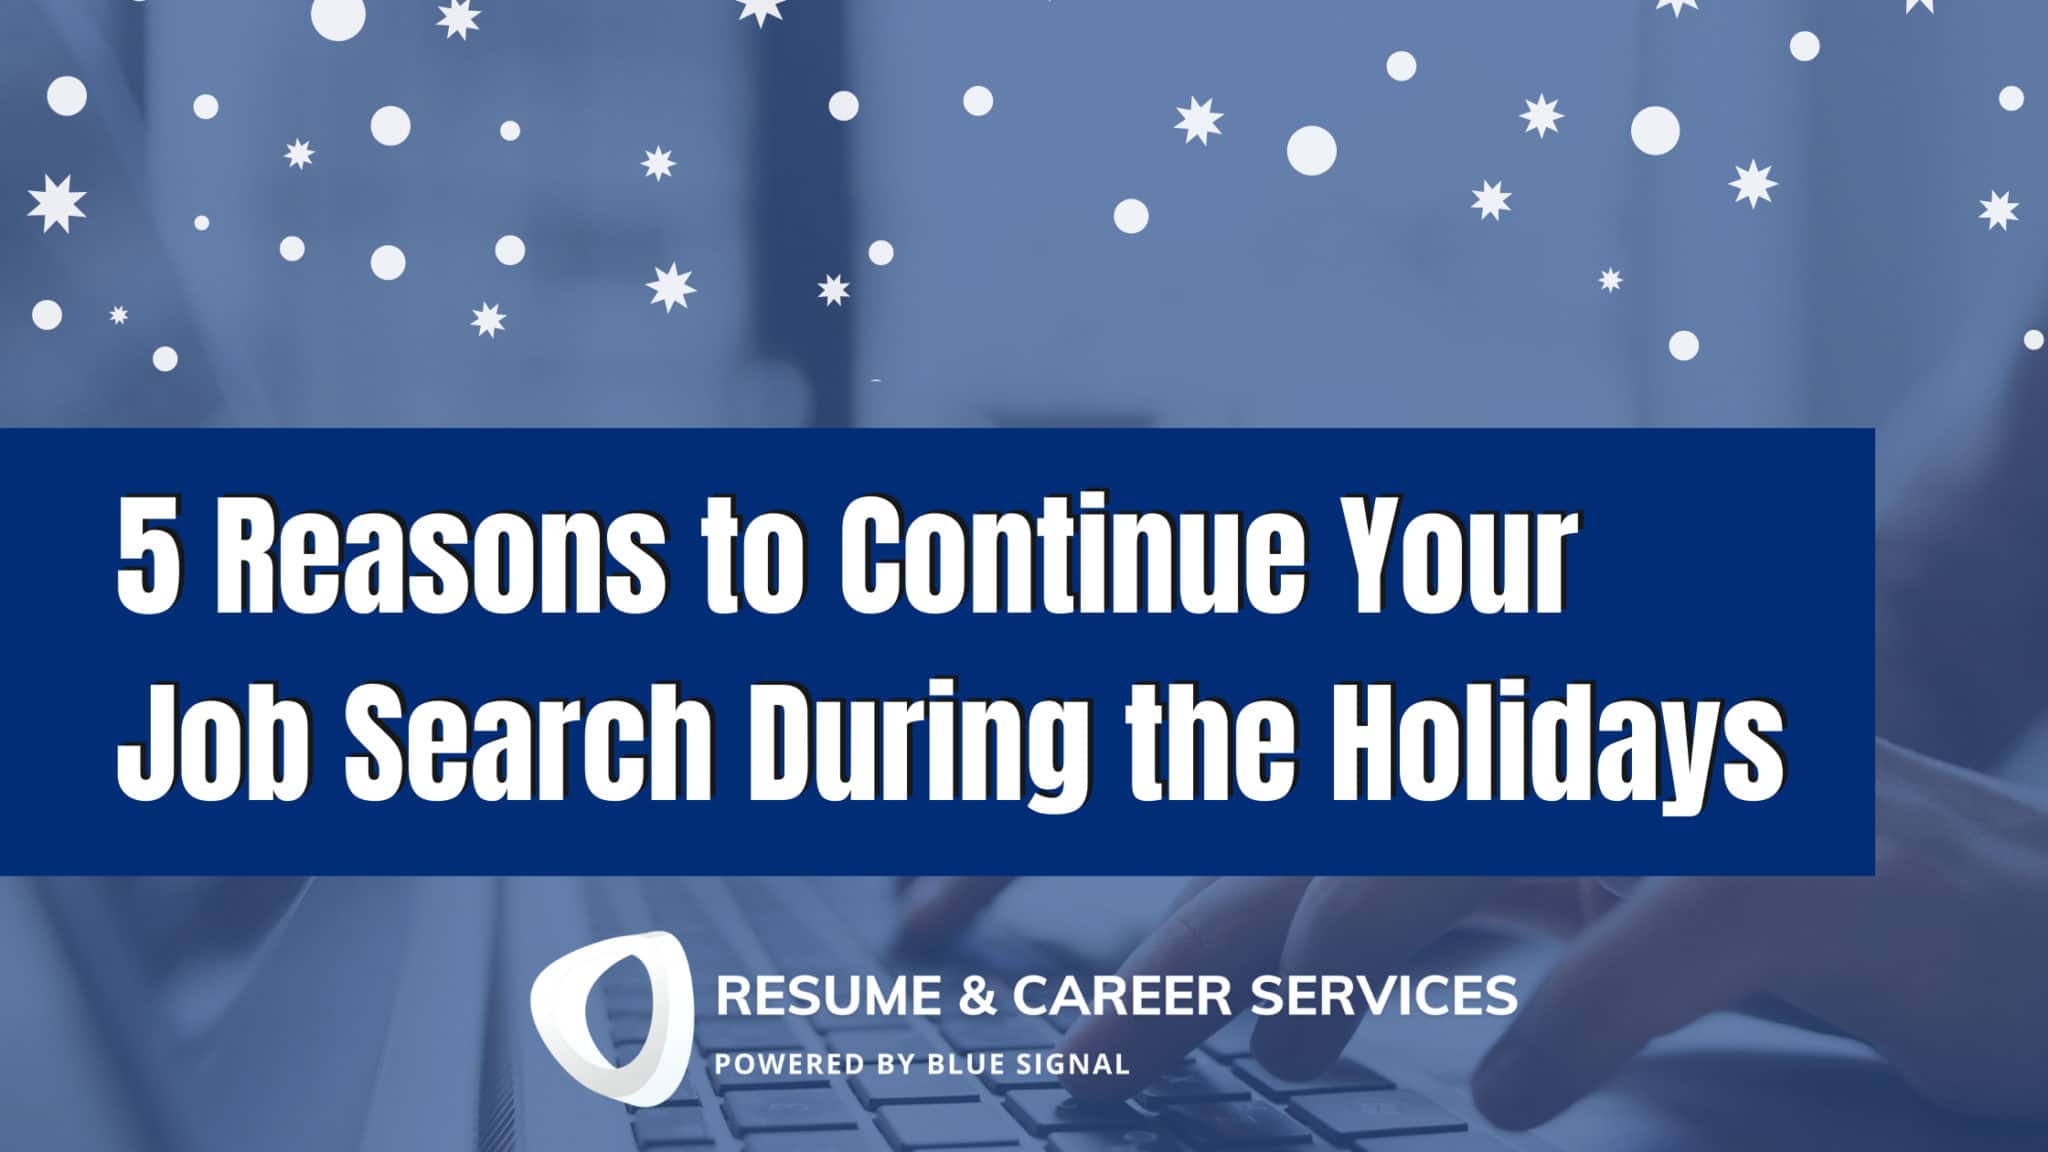 Job Search During the Holidays